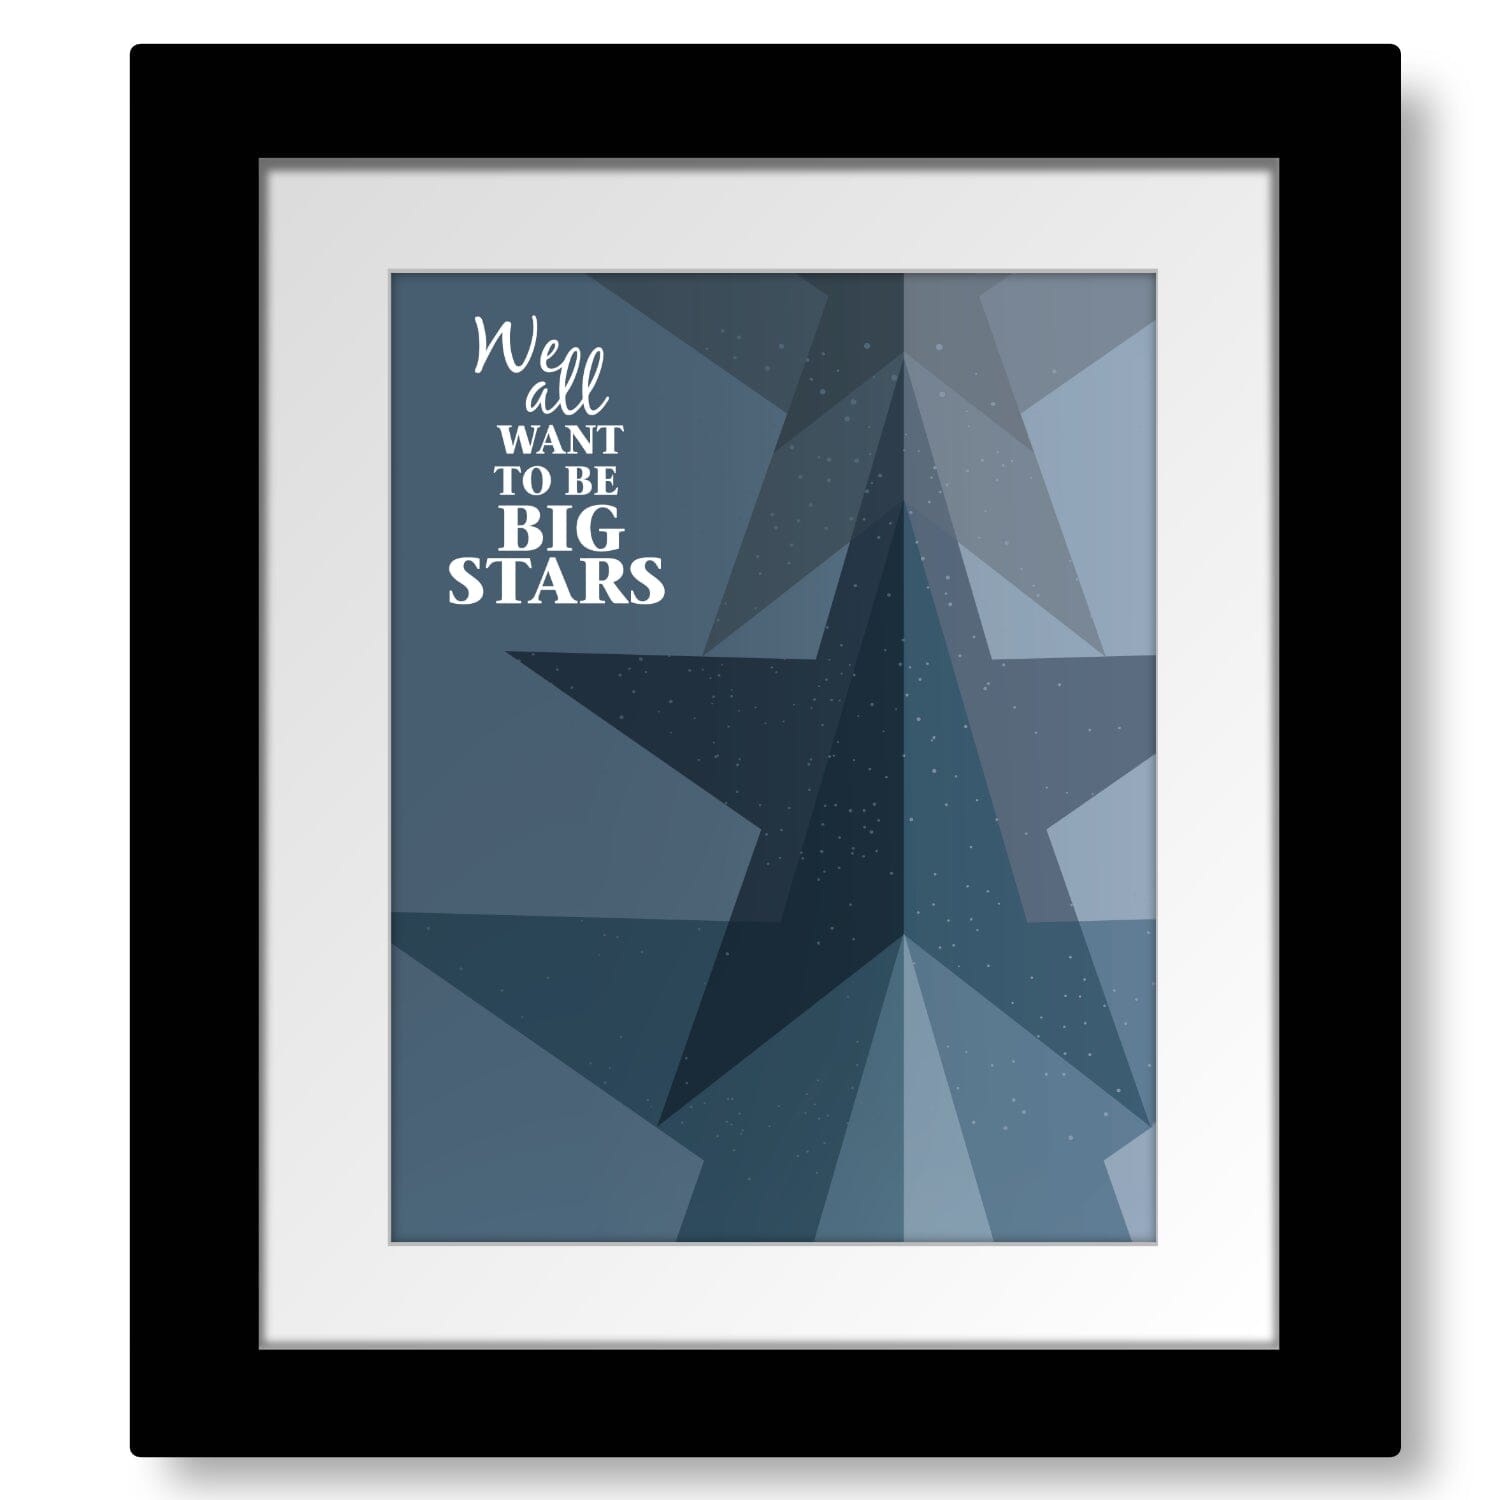 Mr. Jones by the Counting Crows - Song Lyrics Art Print Song Lyrics Art Song Lyrics Art 8x10 Framed and Matted Print 